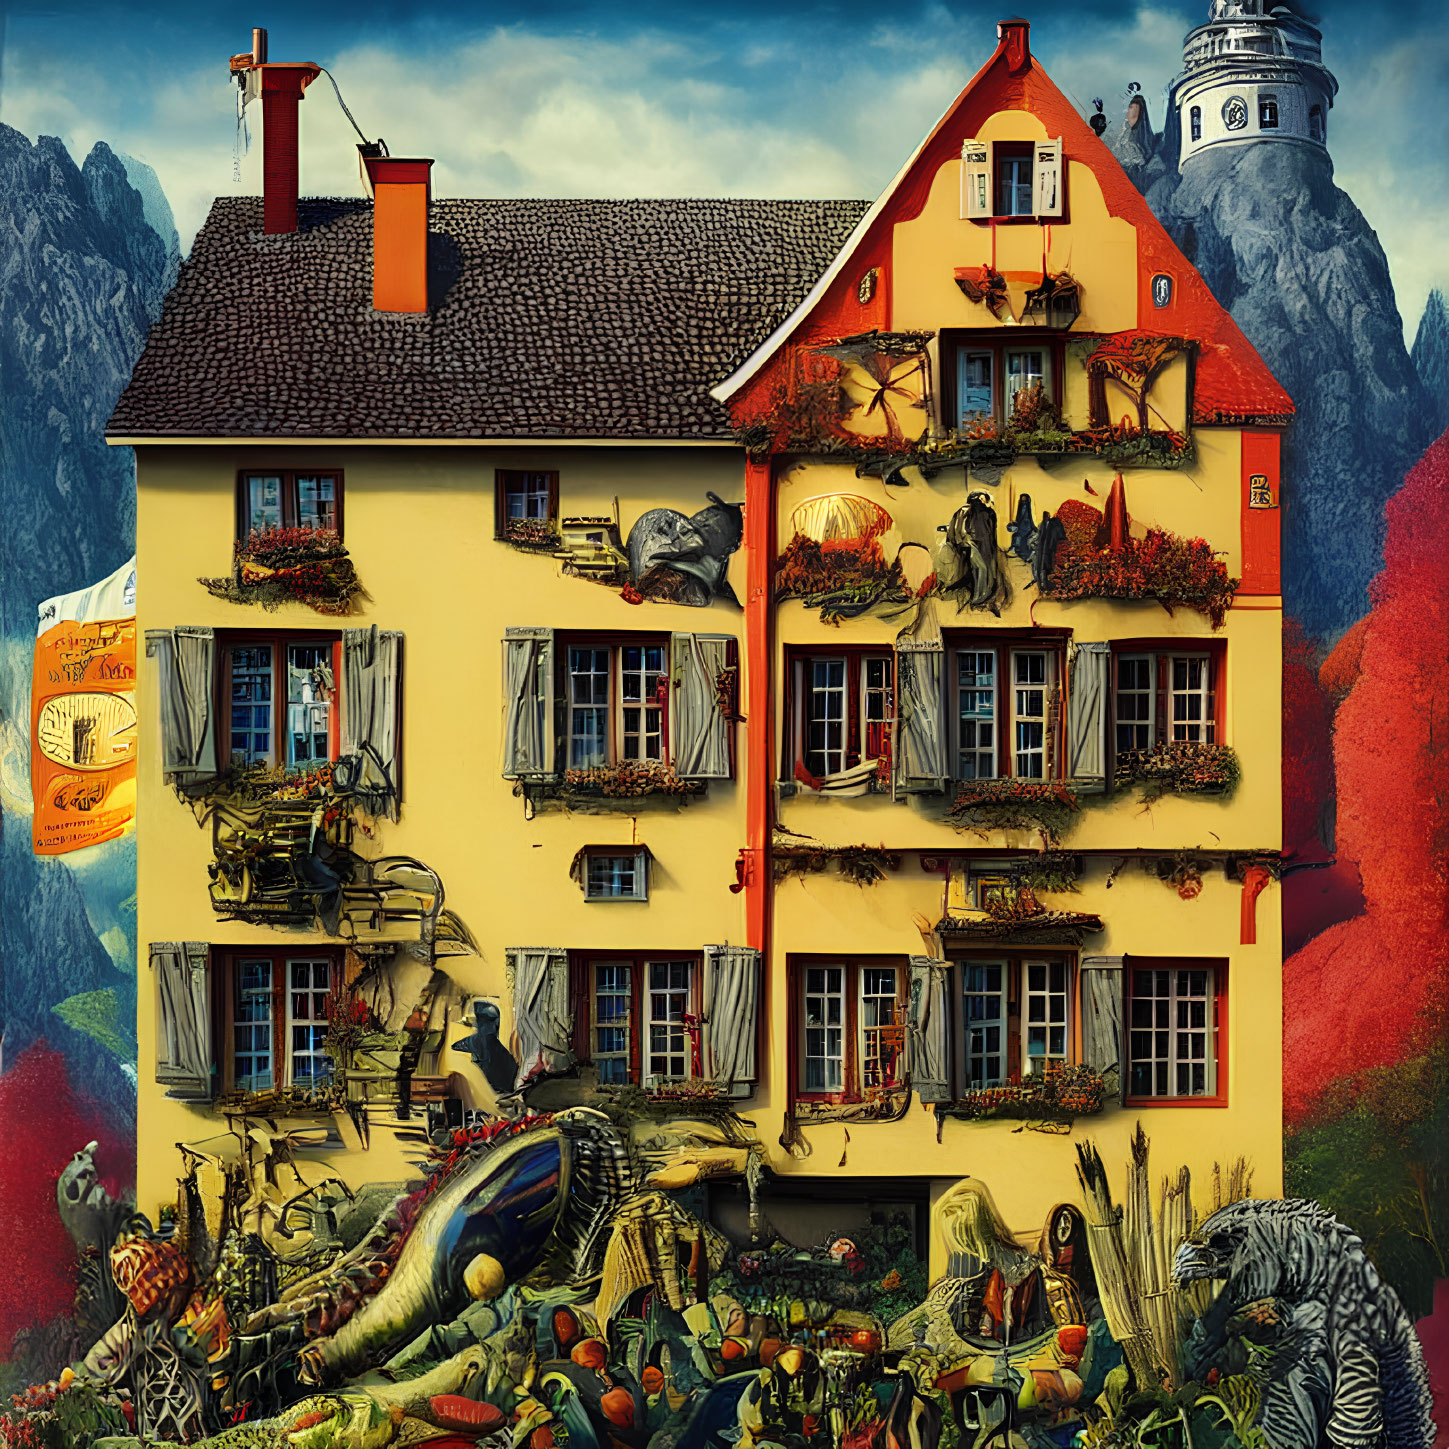 Vibrant surreal house illustration with animals, fruits, and objects against mountain backdrop